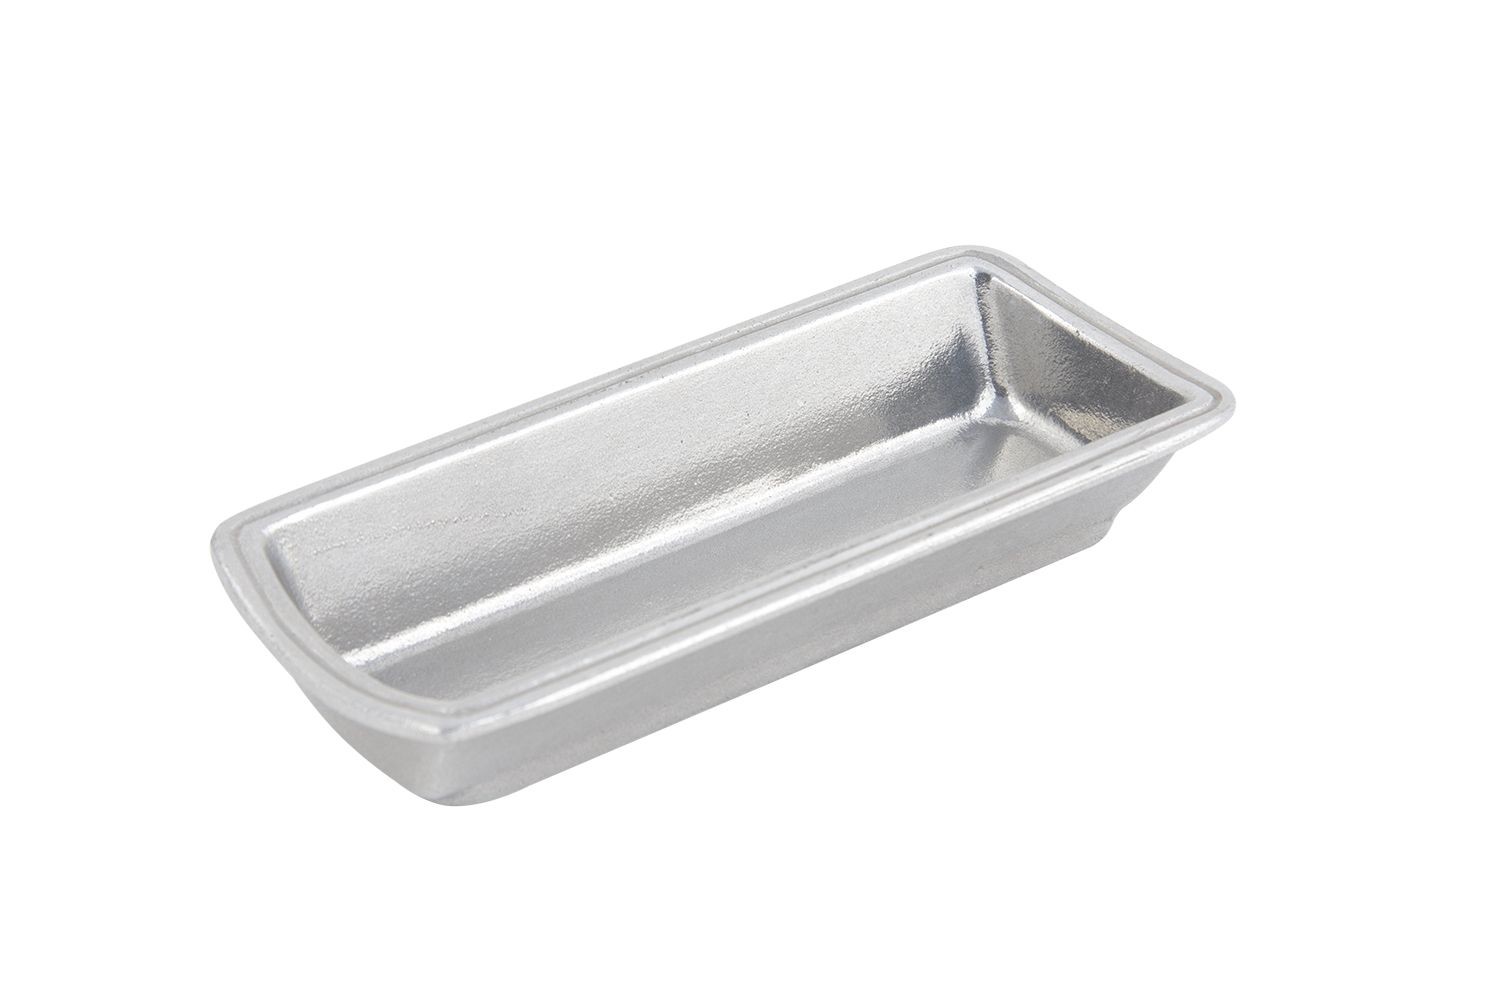 Bon Chef 9031P Celery and Olive Tray, Pewter Glo 3 3/16" x 7 9/16" x 1 1/4", Set of 12